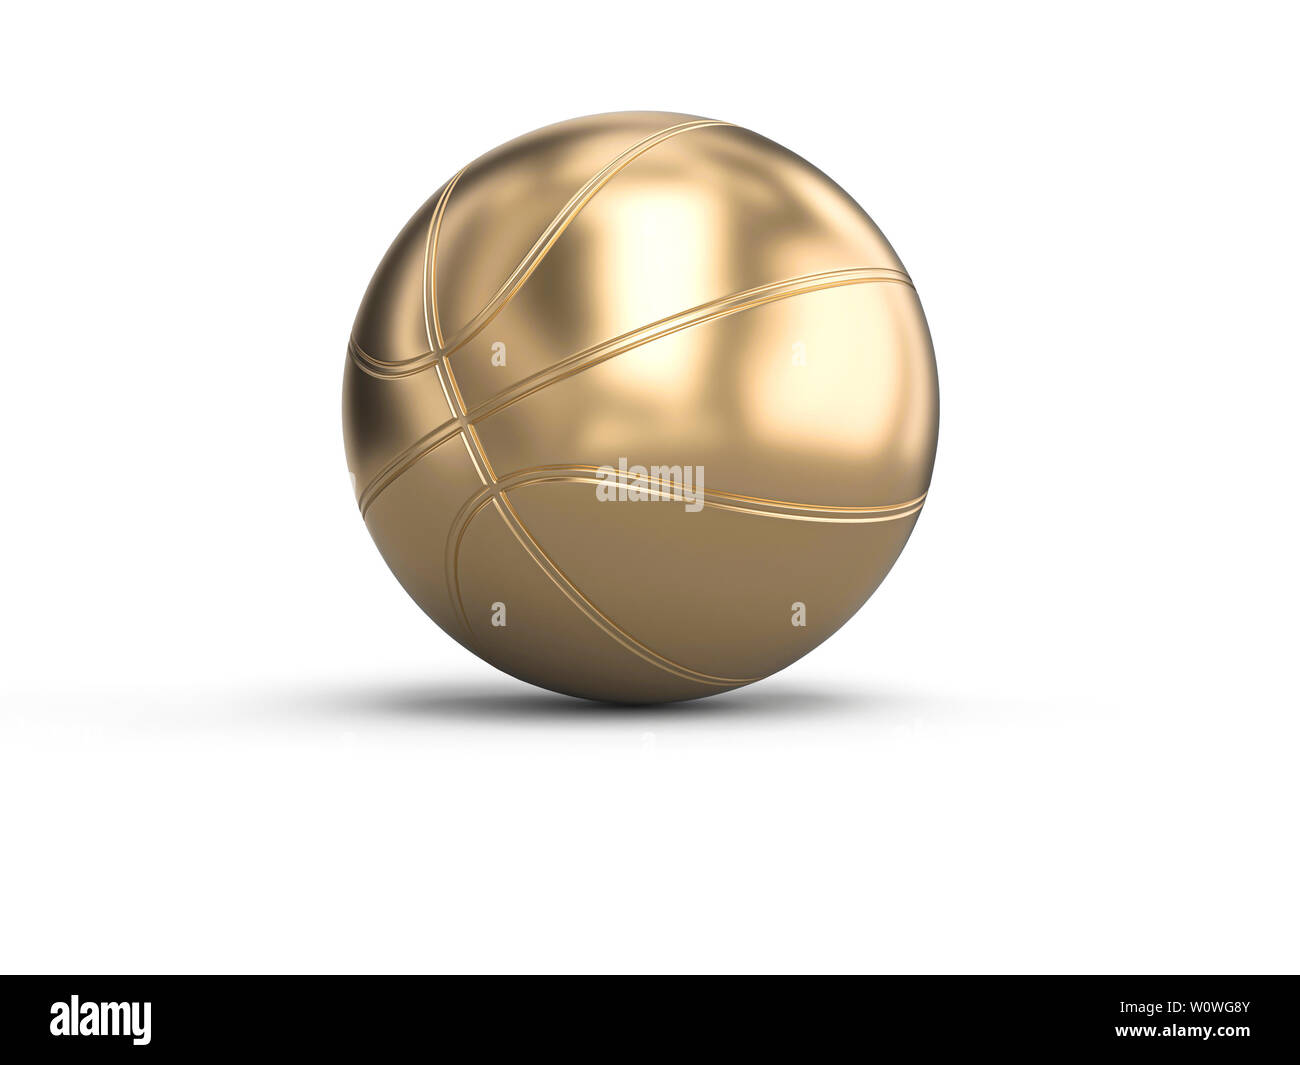 gold-colored basketball on a white background. 3d image render Stock Photo